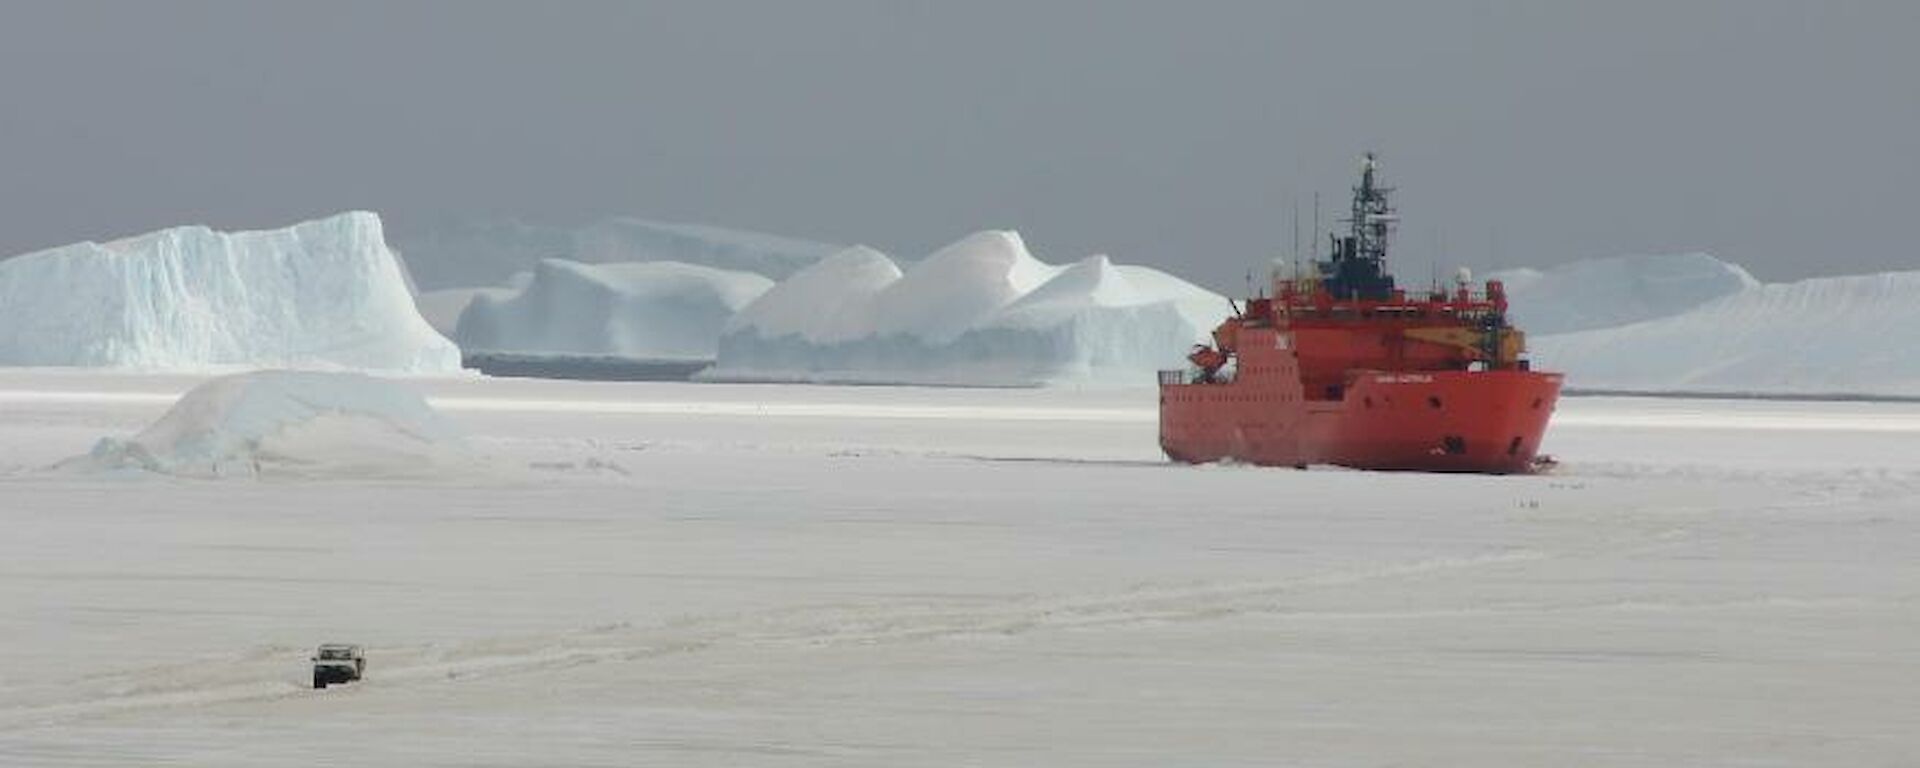 The brightly painted Aurora Australis parked up on the sea ice in front of the station with a vehicle travailing on the ice in the foreground